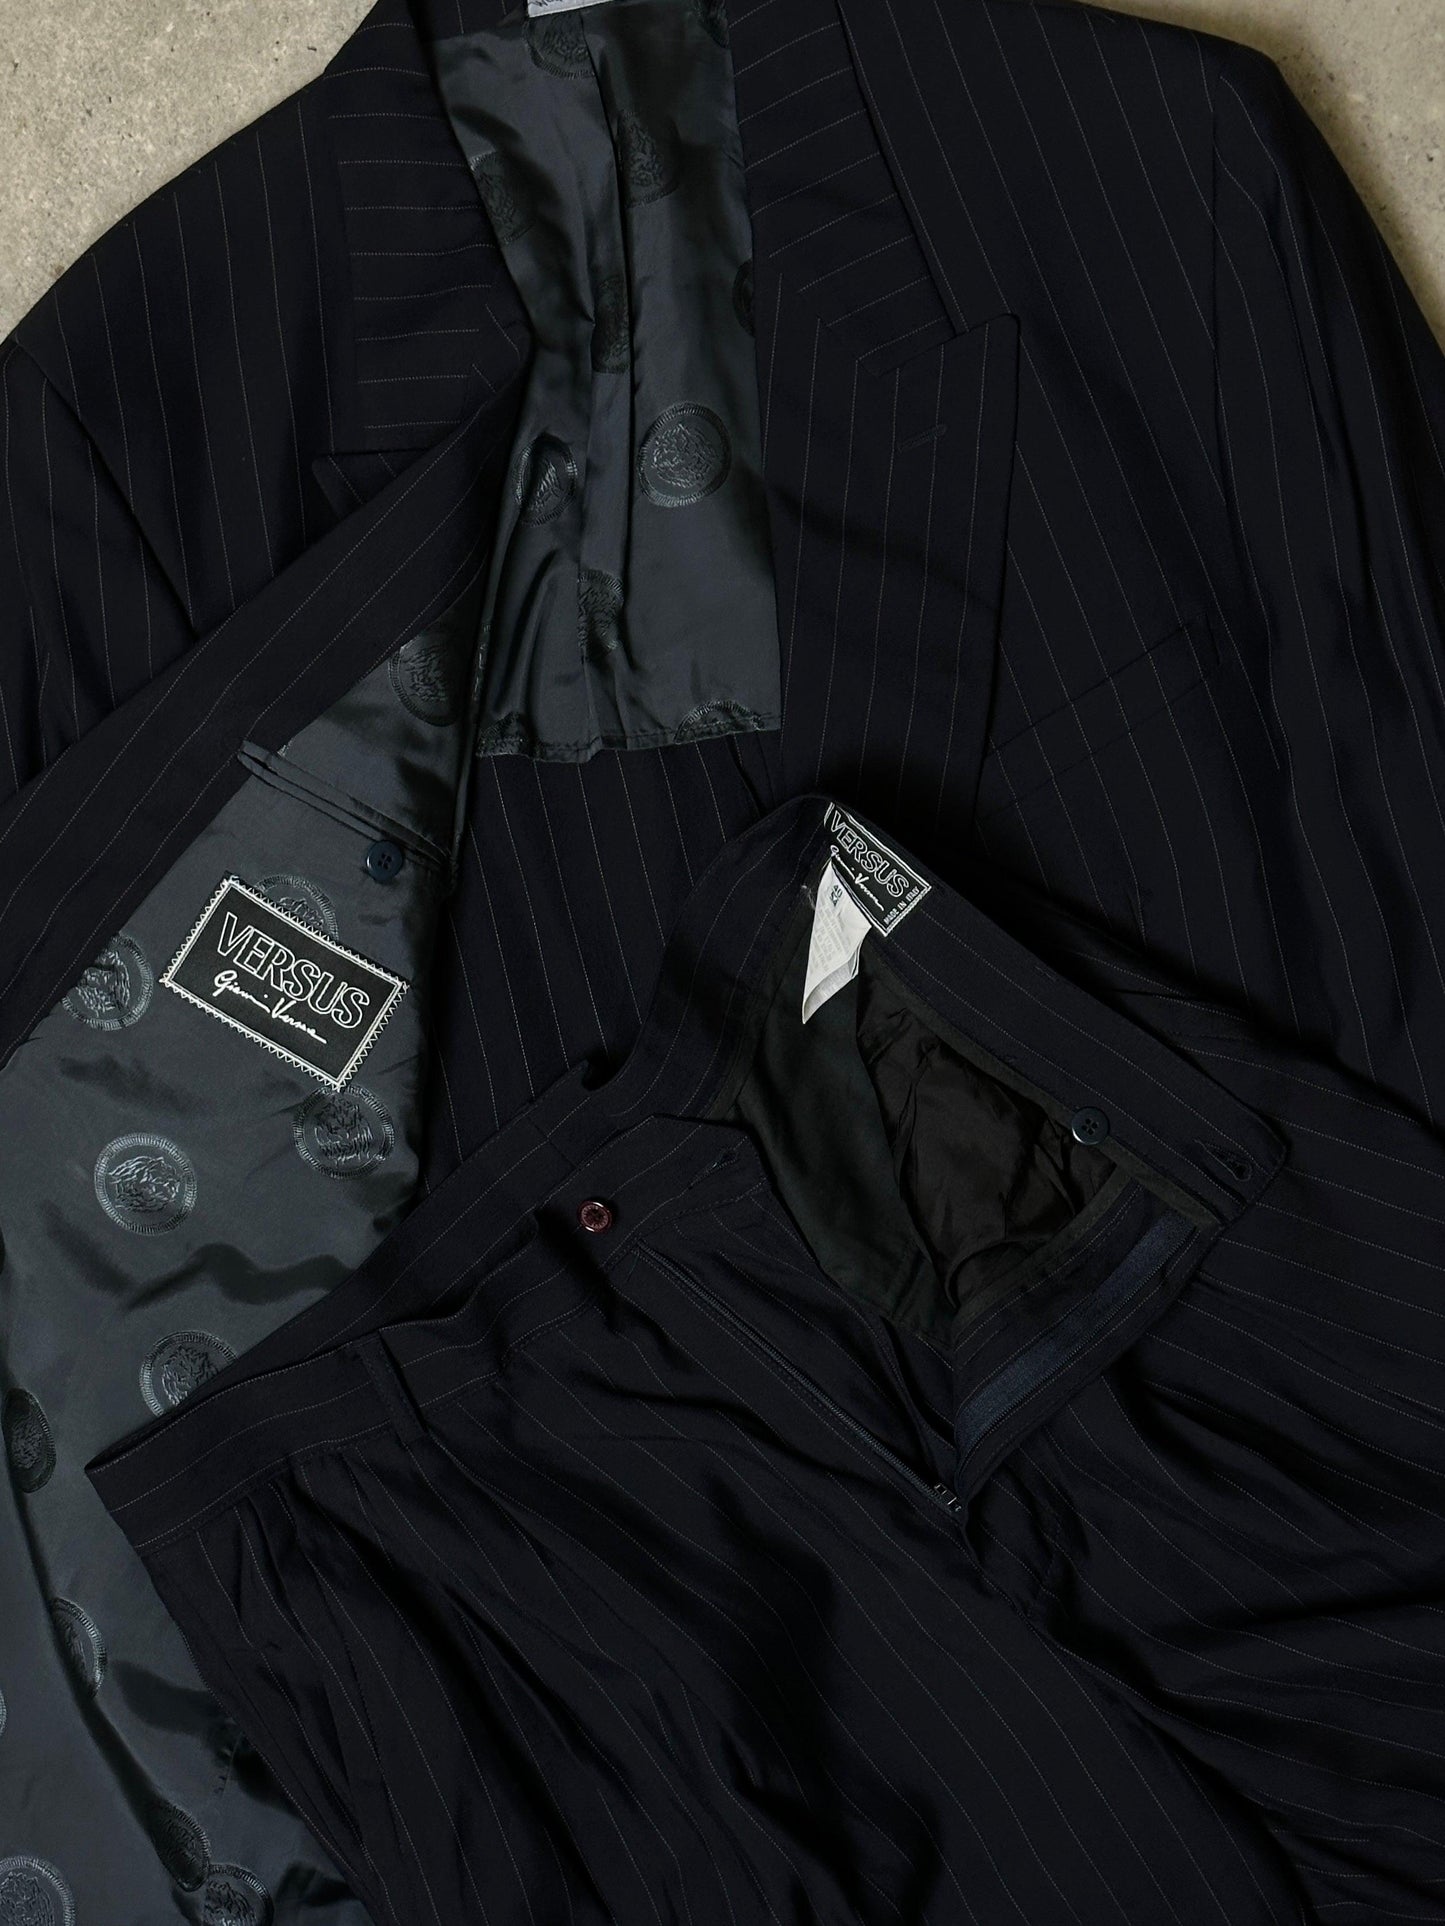 Versace Wool Pinstripe Double Breasted Suit - 44L/W34 - Known Source